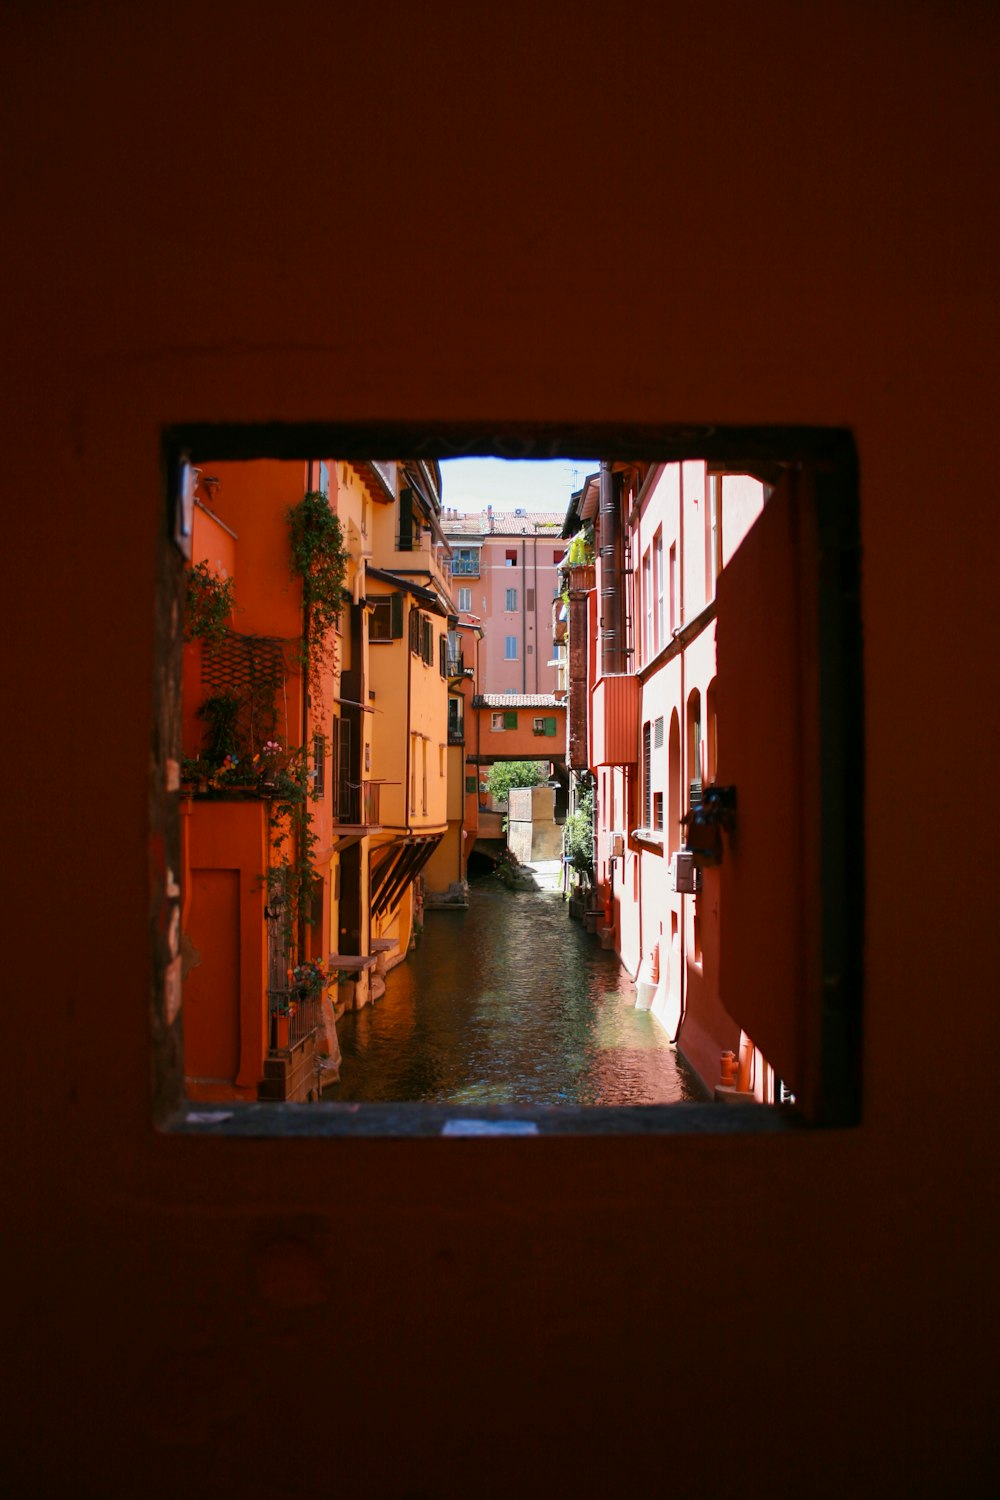 a view of a canal from a window in a building